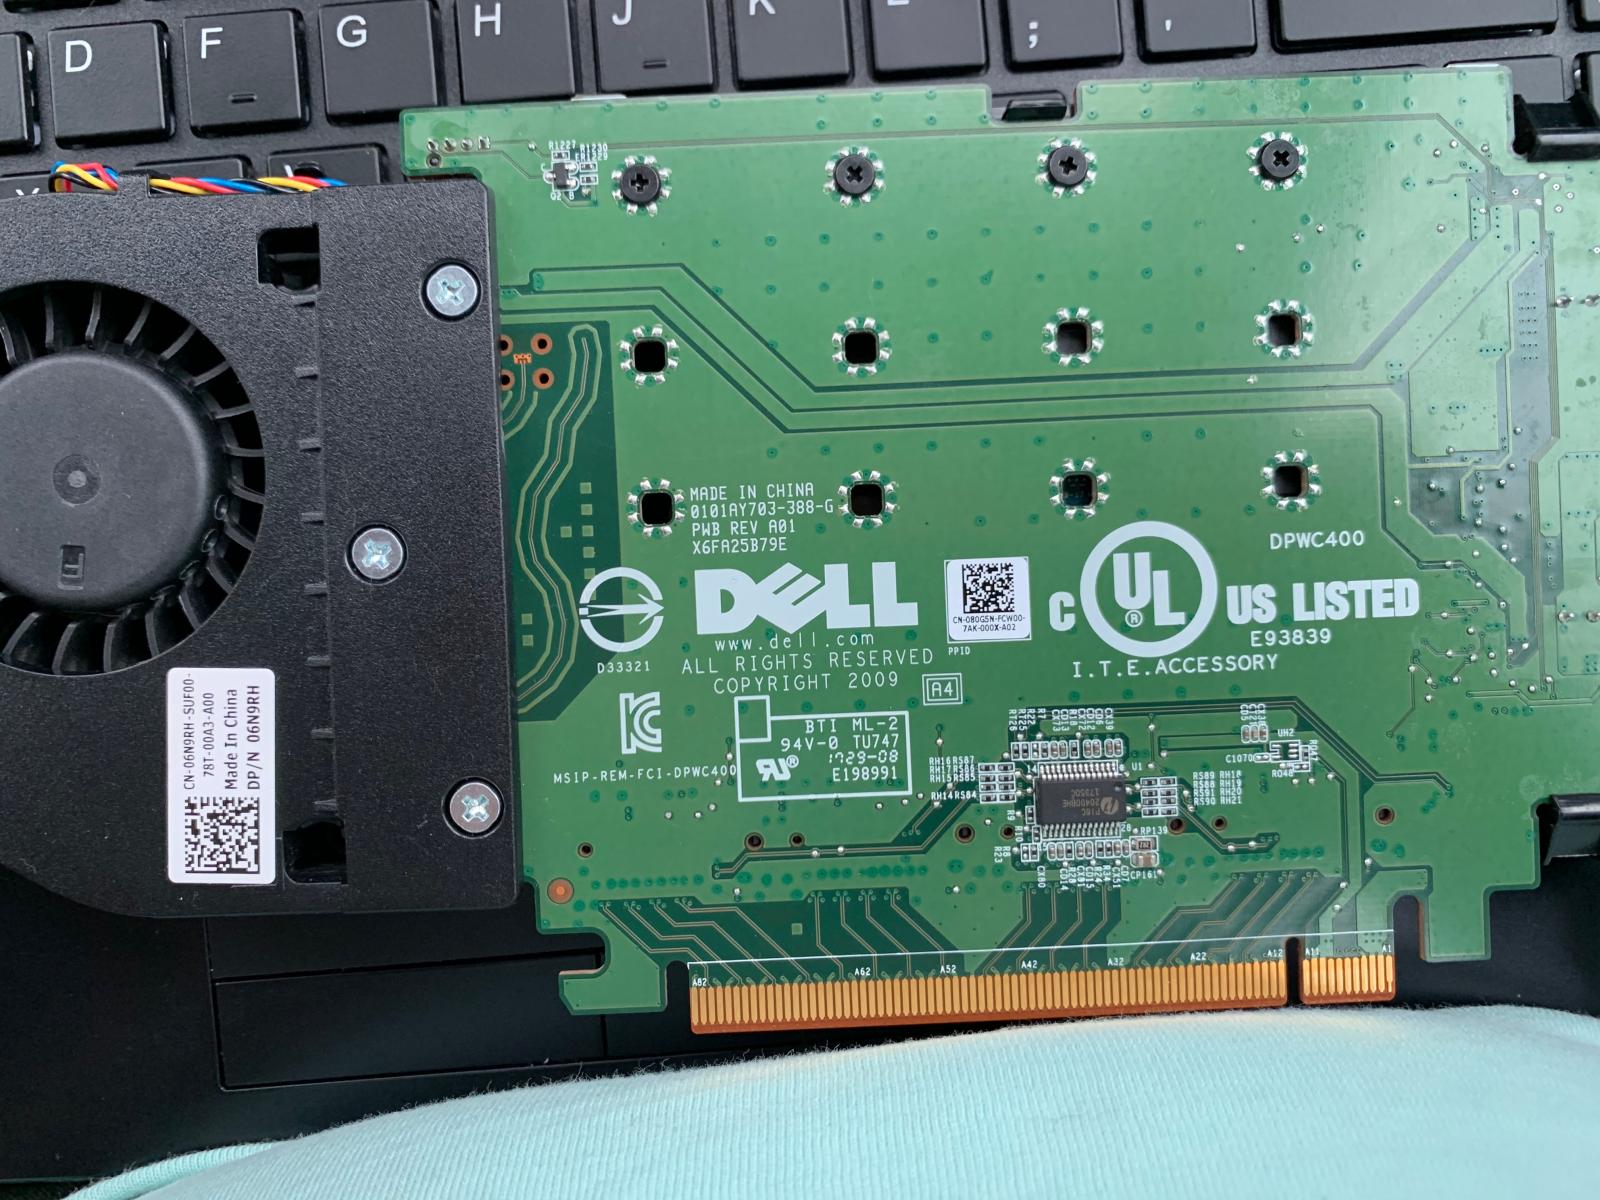 For sale Dell DPWC400 Ultra-Speed Drive Quad NVMe M.2 PCIe x16 Card